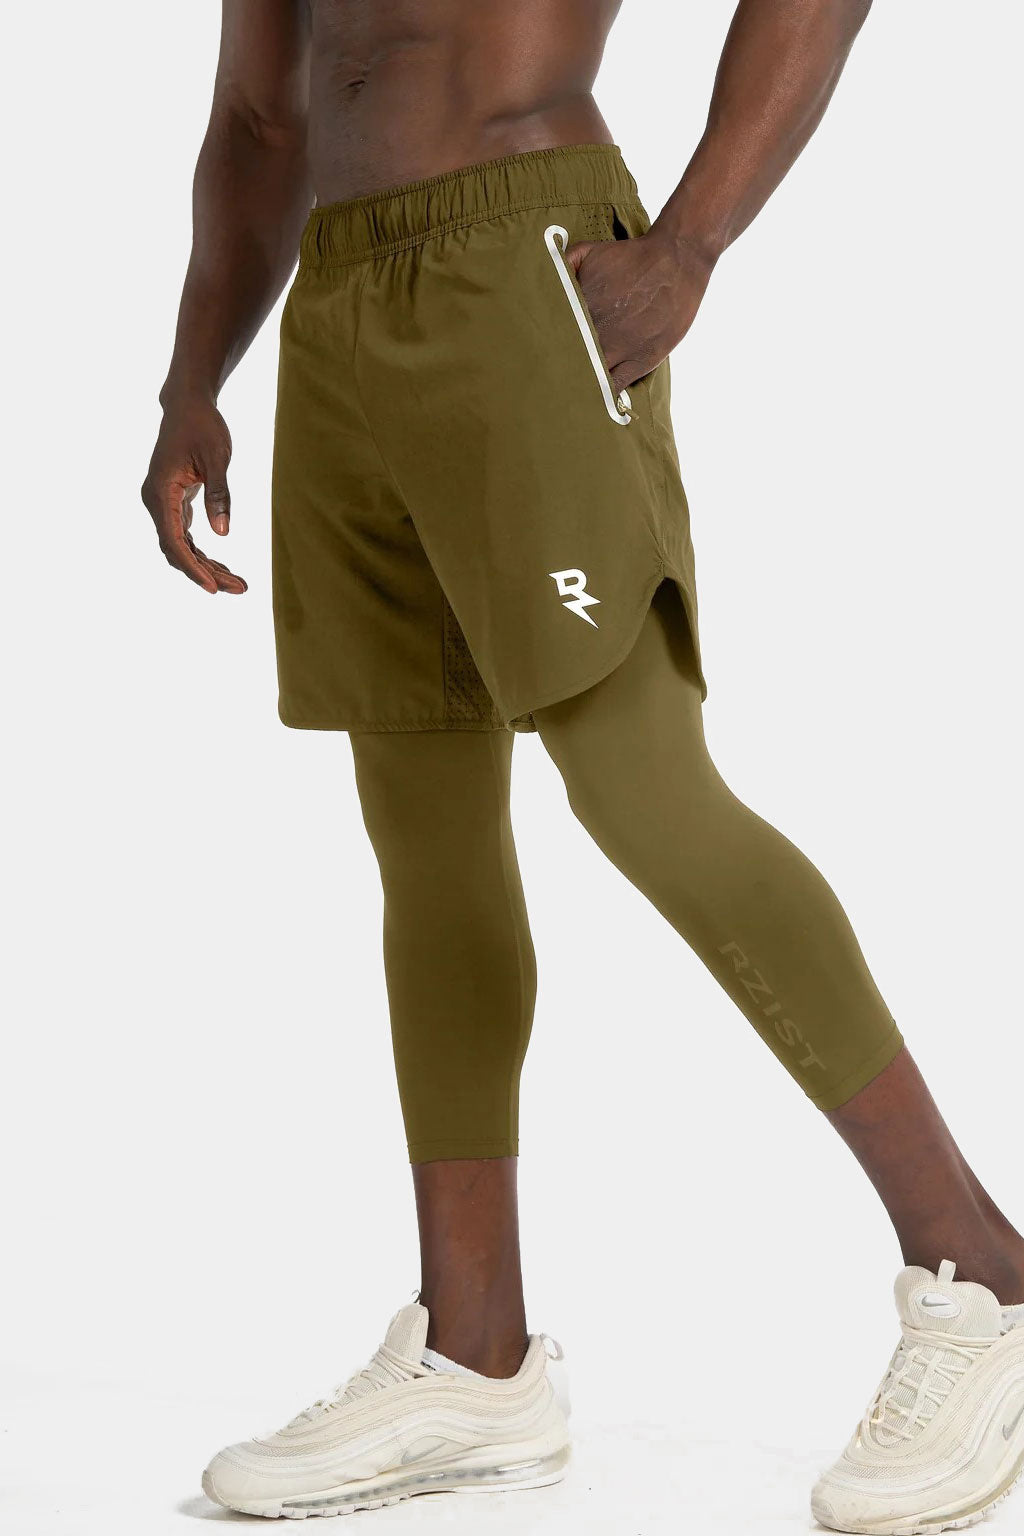 Rzist - Men's 2-in-1 Capulet Olive Shorts With Long Tights